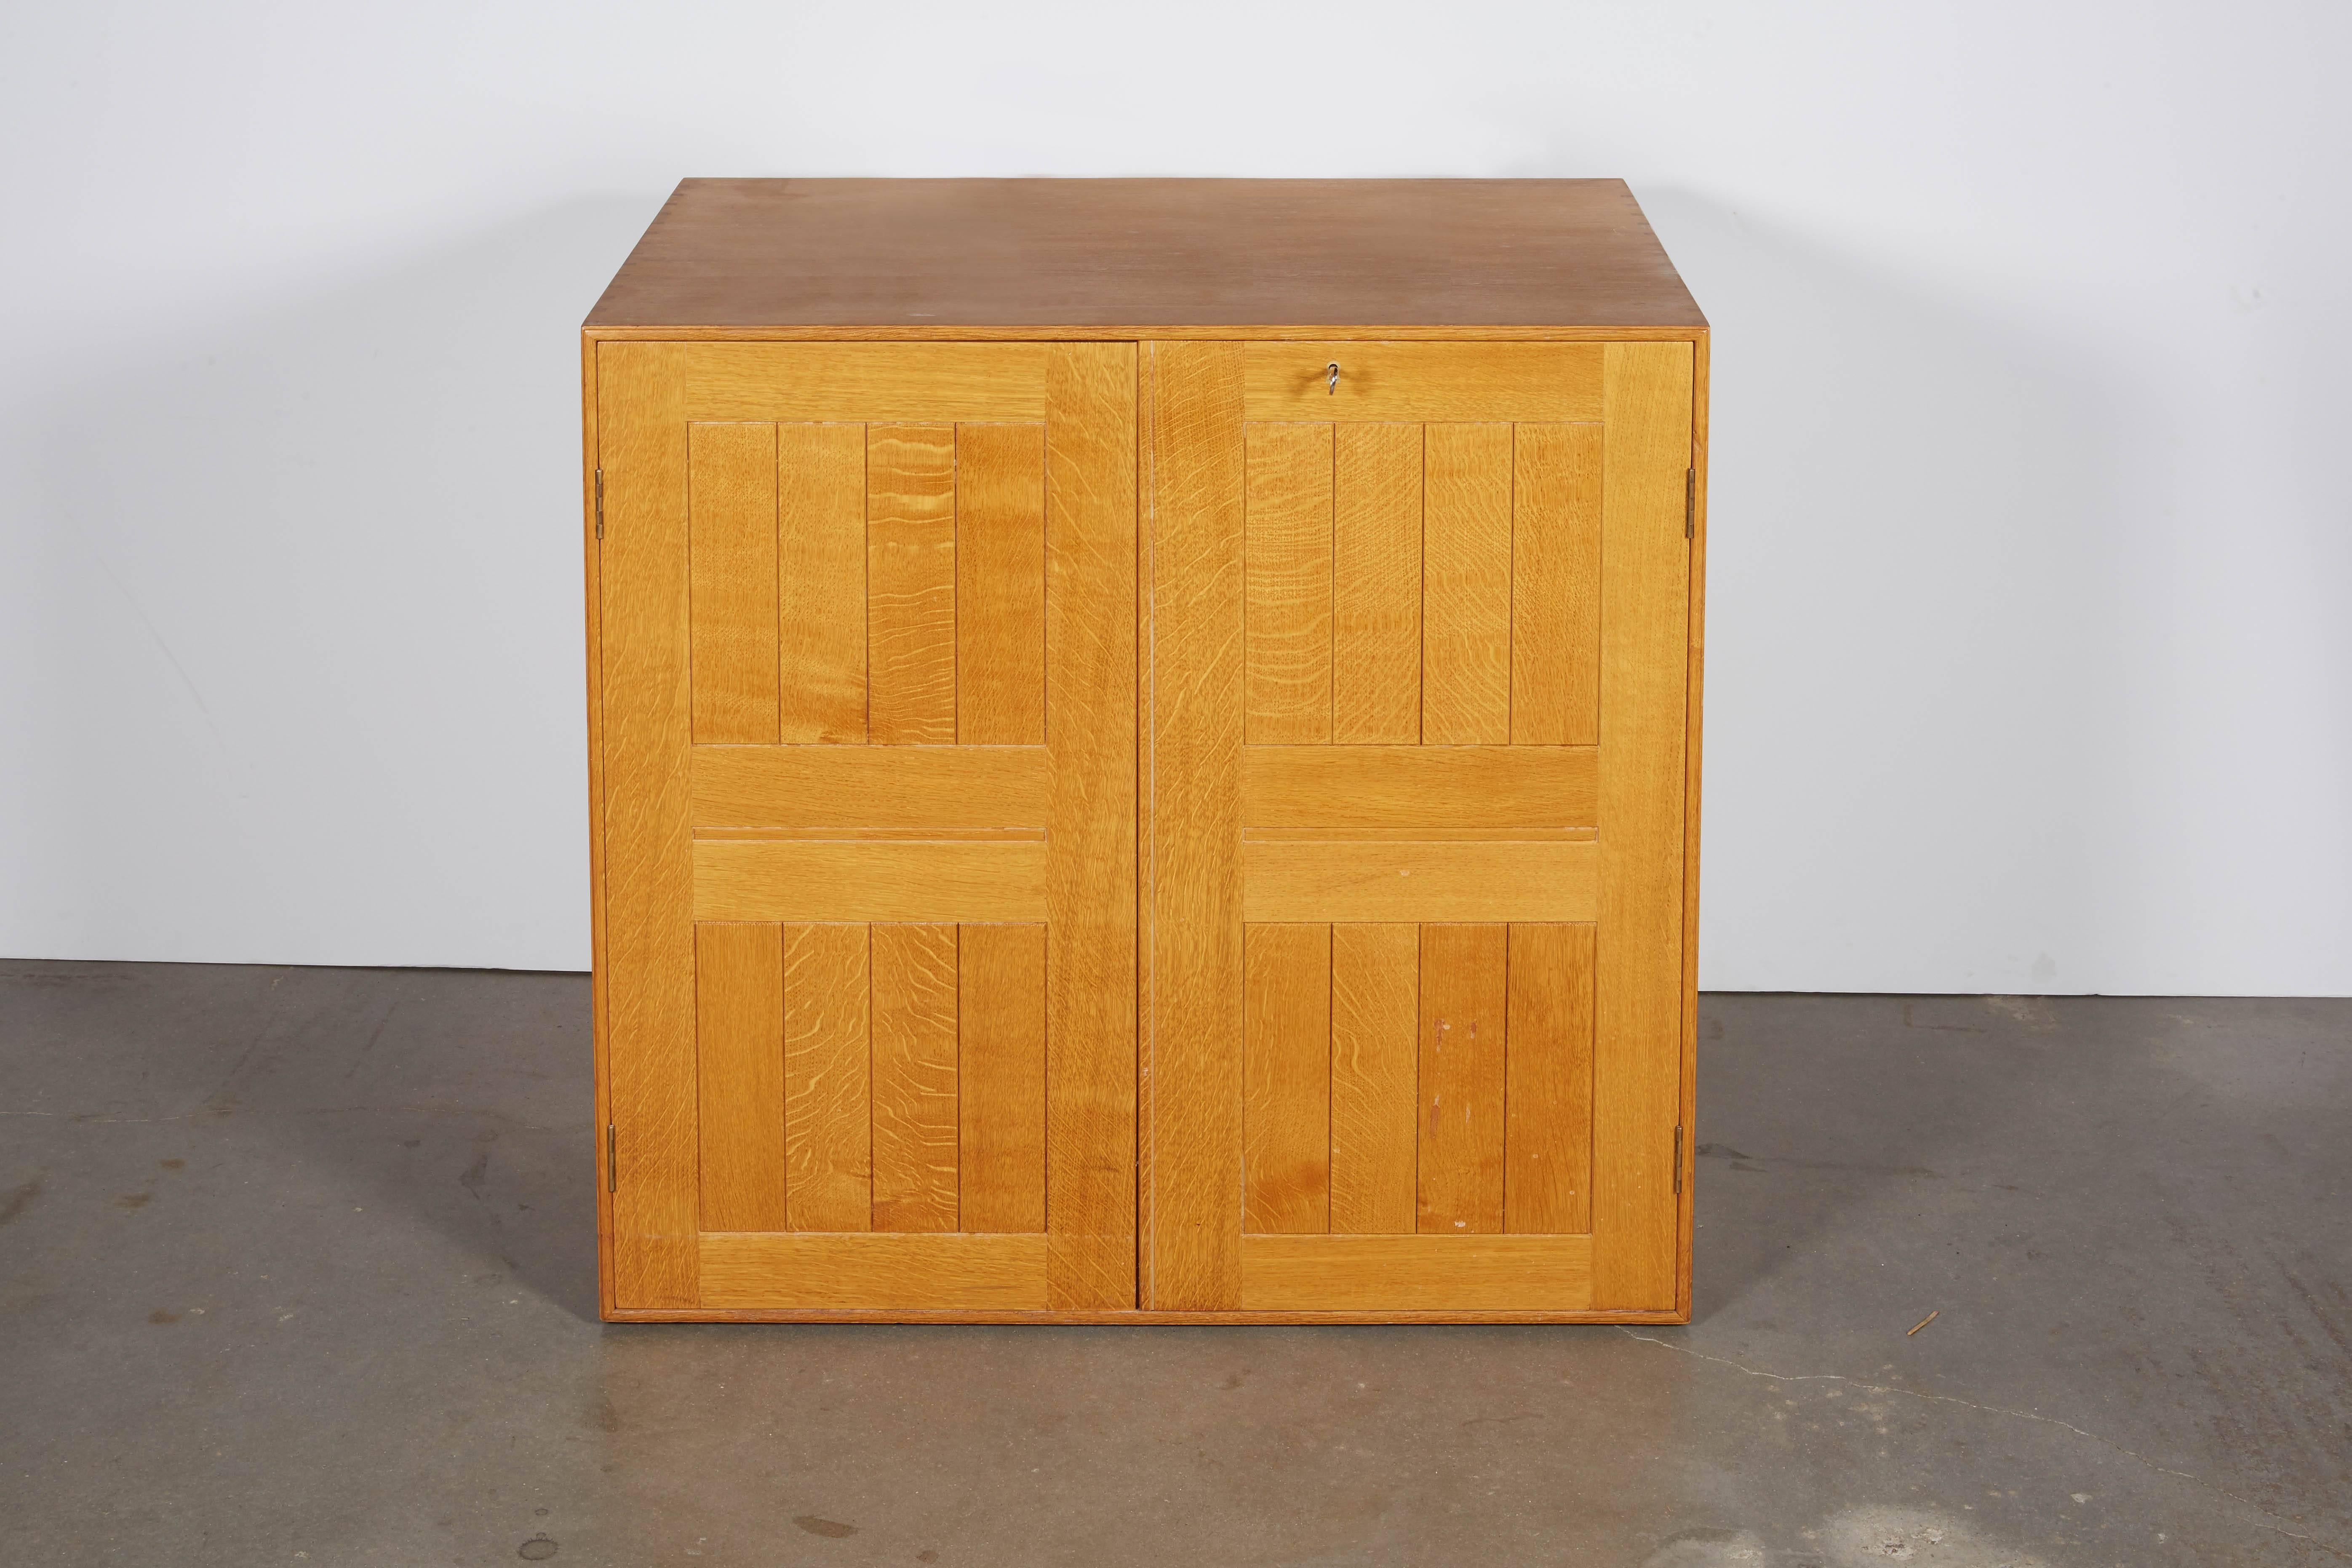 Vintage 1920s Oak Bar Cabinet by Mogens Koch

This square cabinet is in excellent condition and is wall mountable. Ready for pick up, delivery, or shipping anywhere in the world.